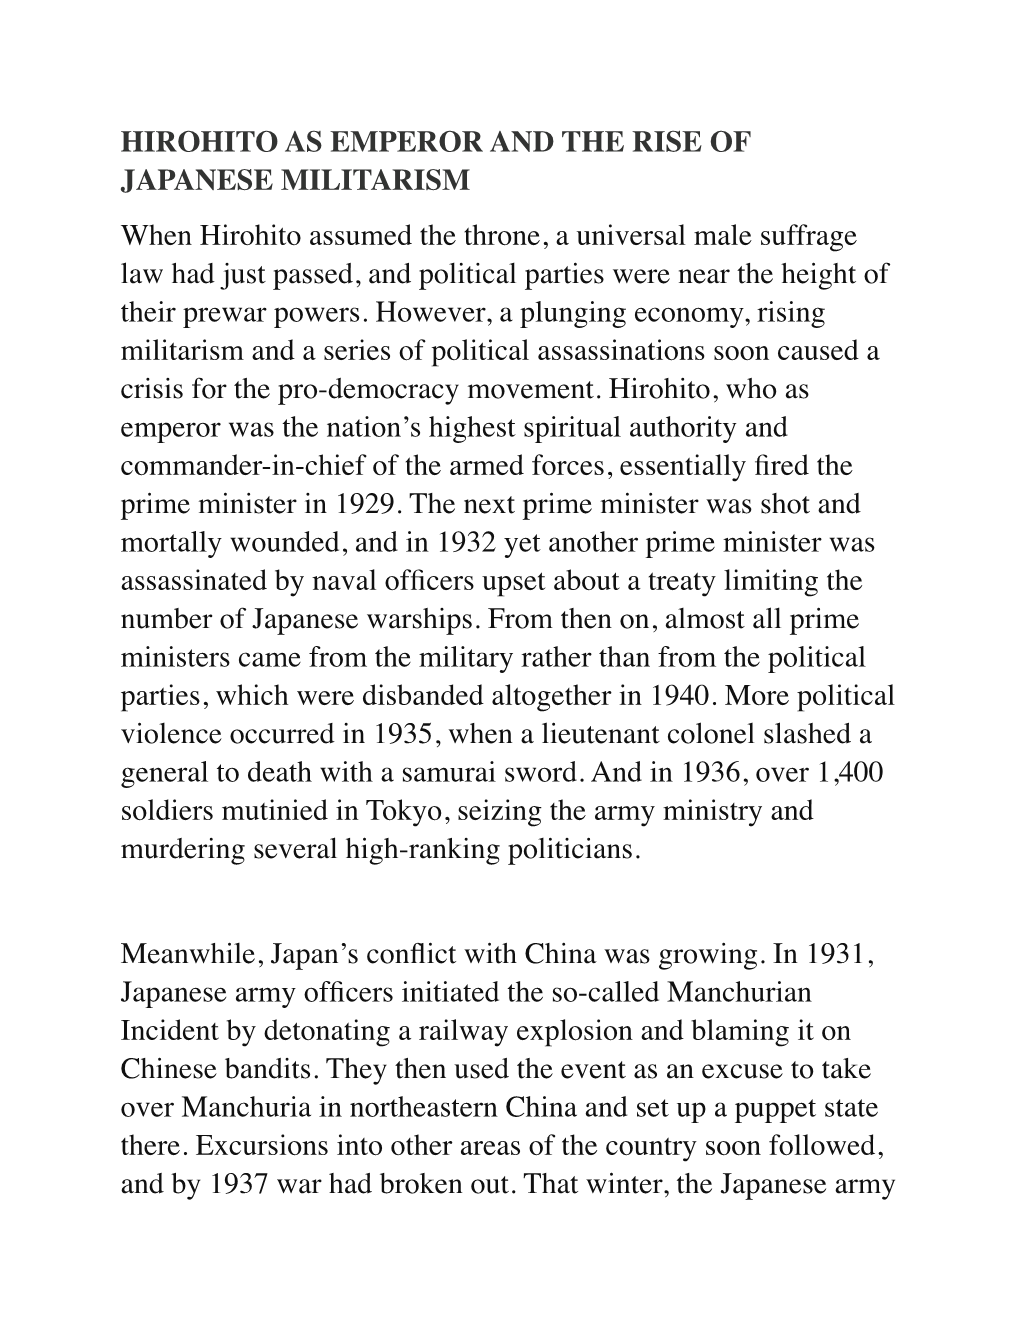 Hirohito As Emperor and the Rise of Japanese Militarism